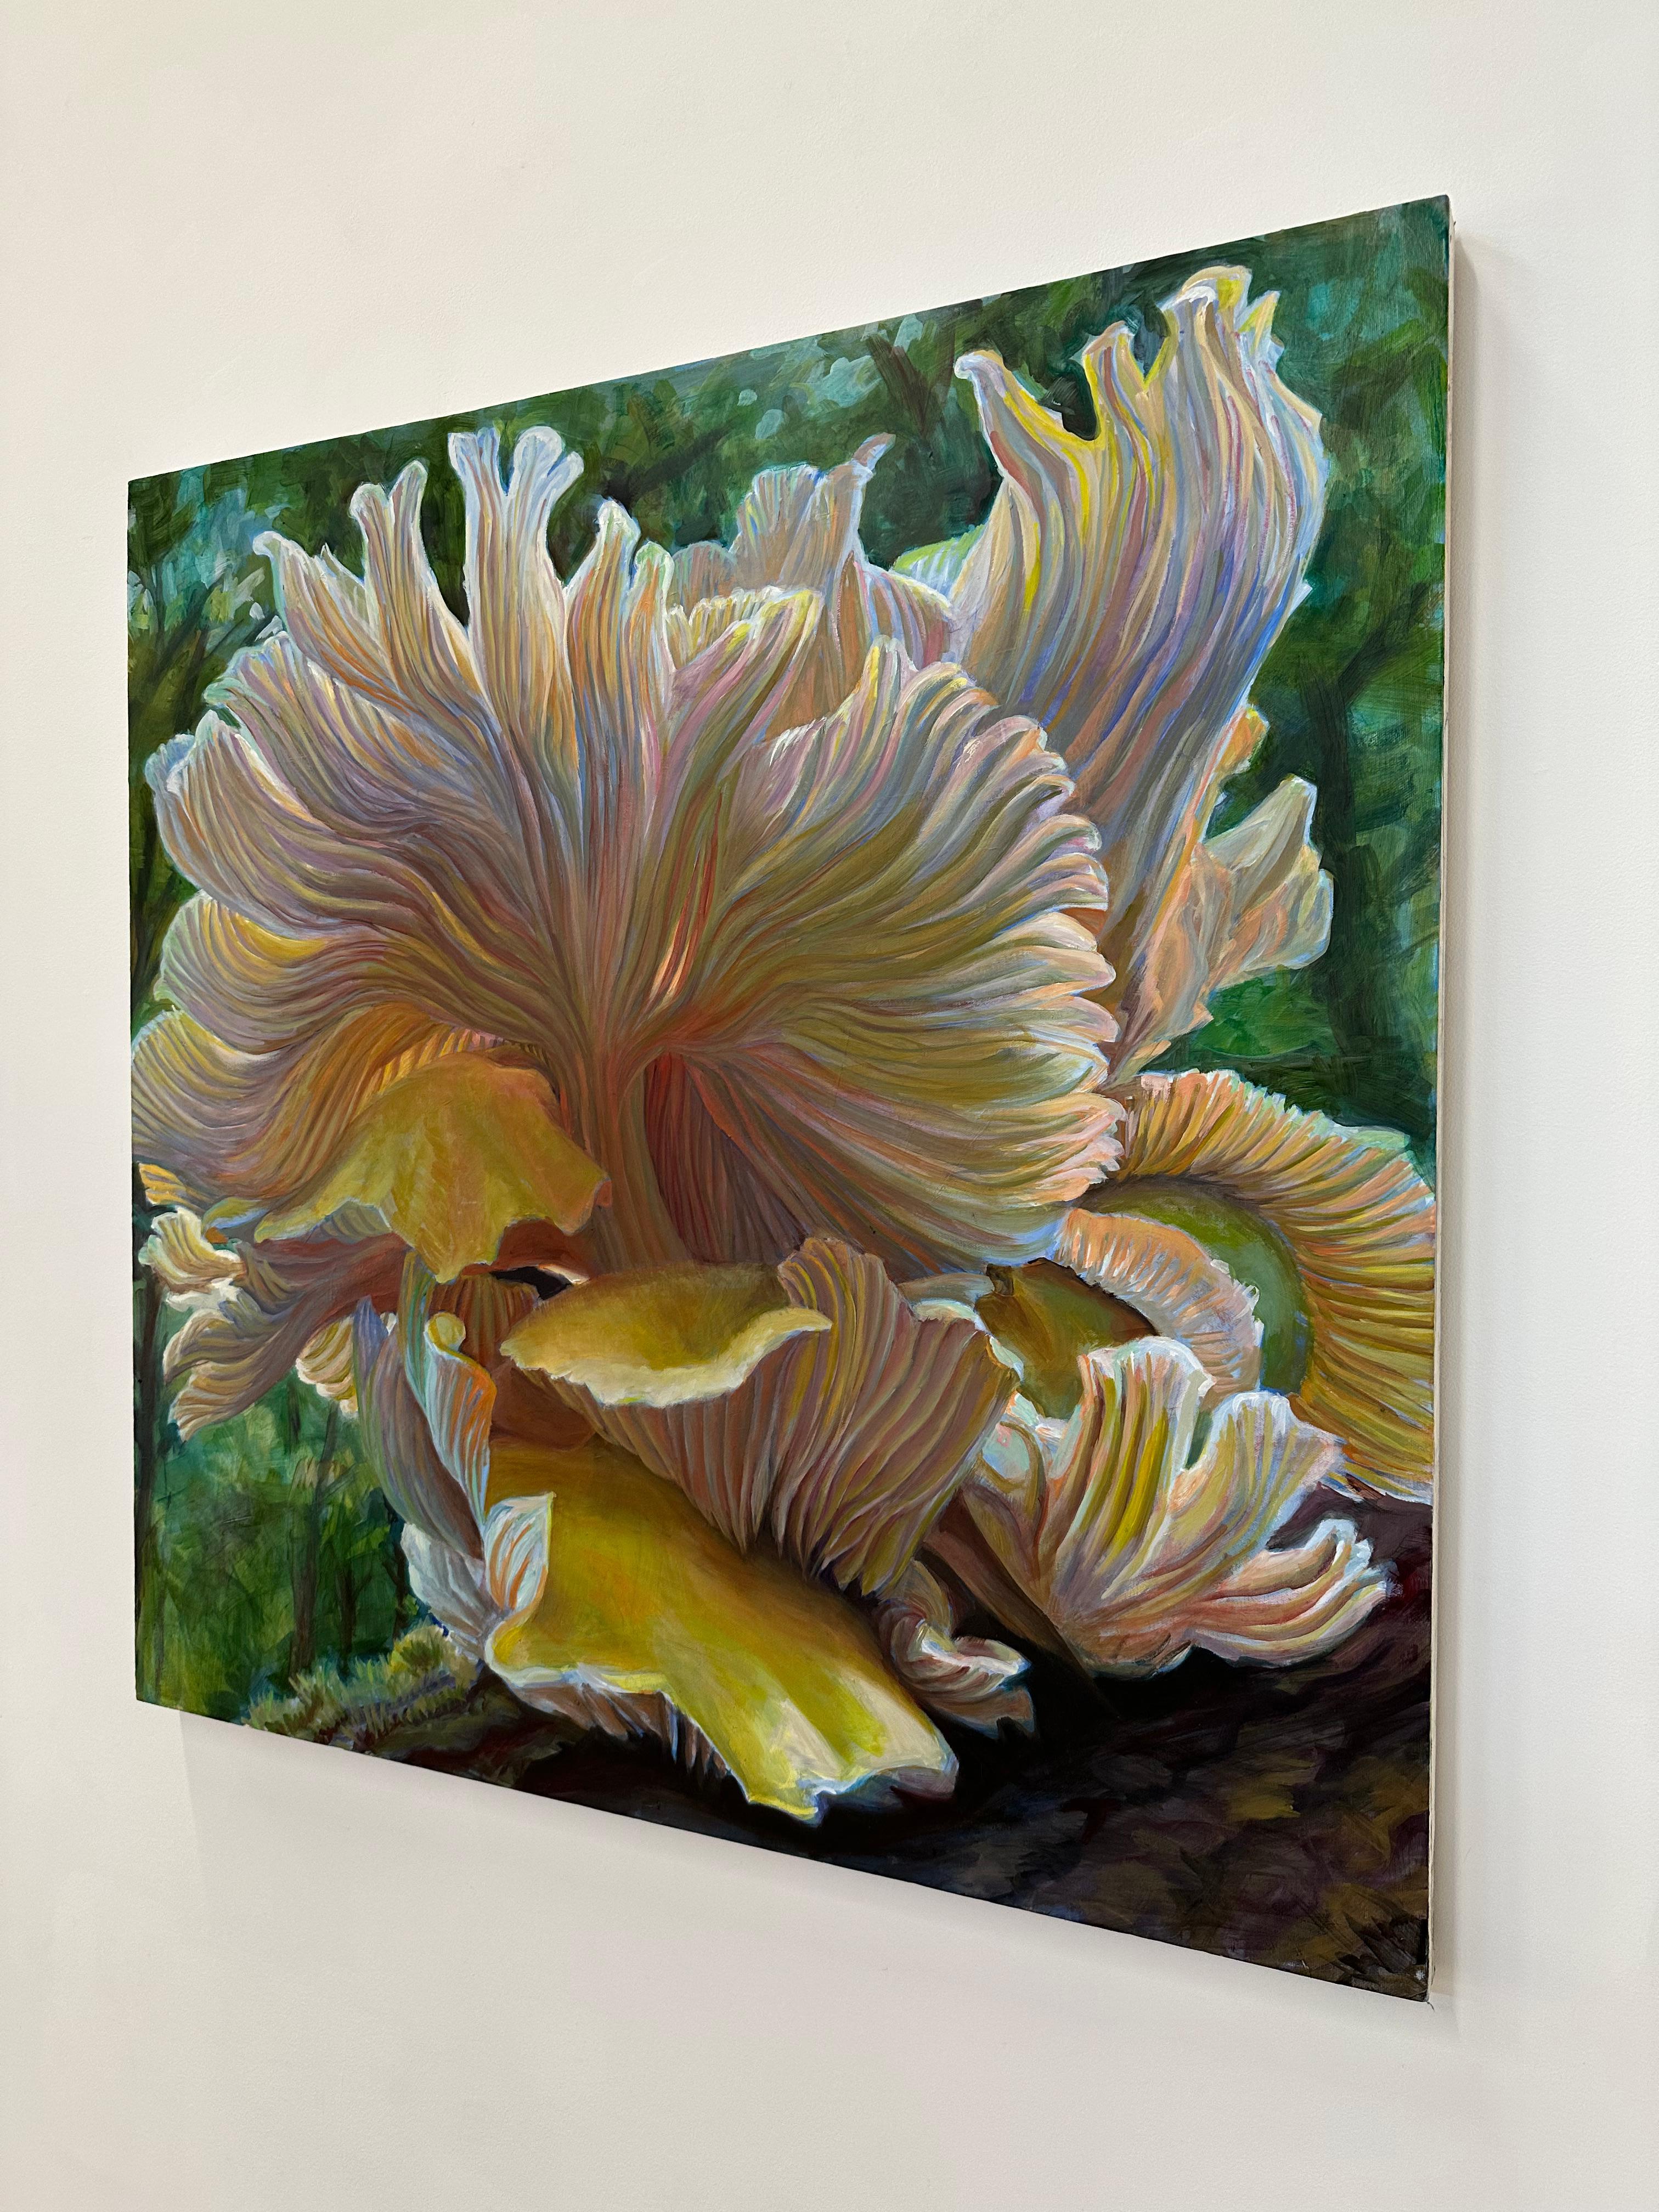 Golden Oysters One, Mushroom Fungi Still Life Painting, Yellow, Peach, Green For Sale 9